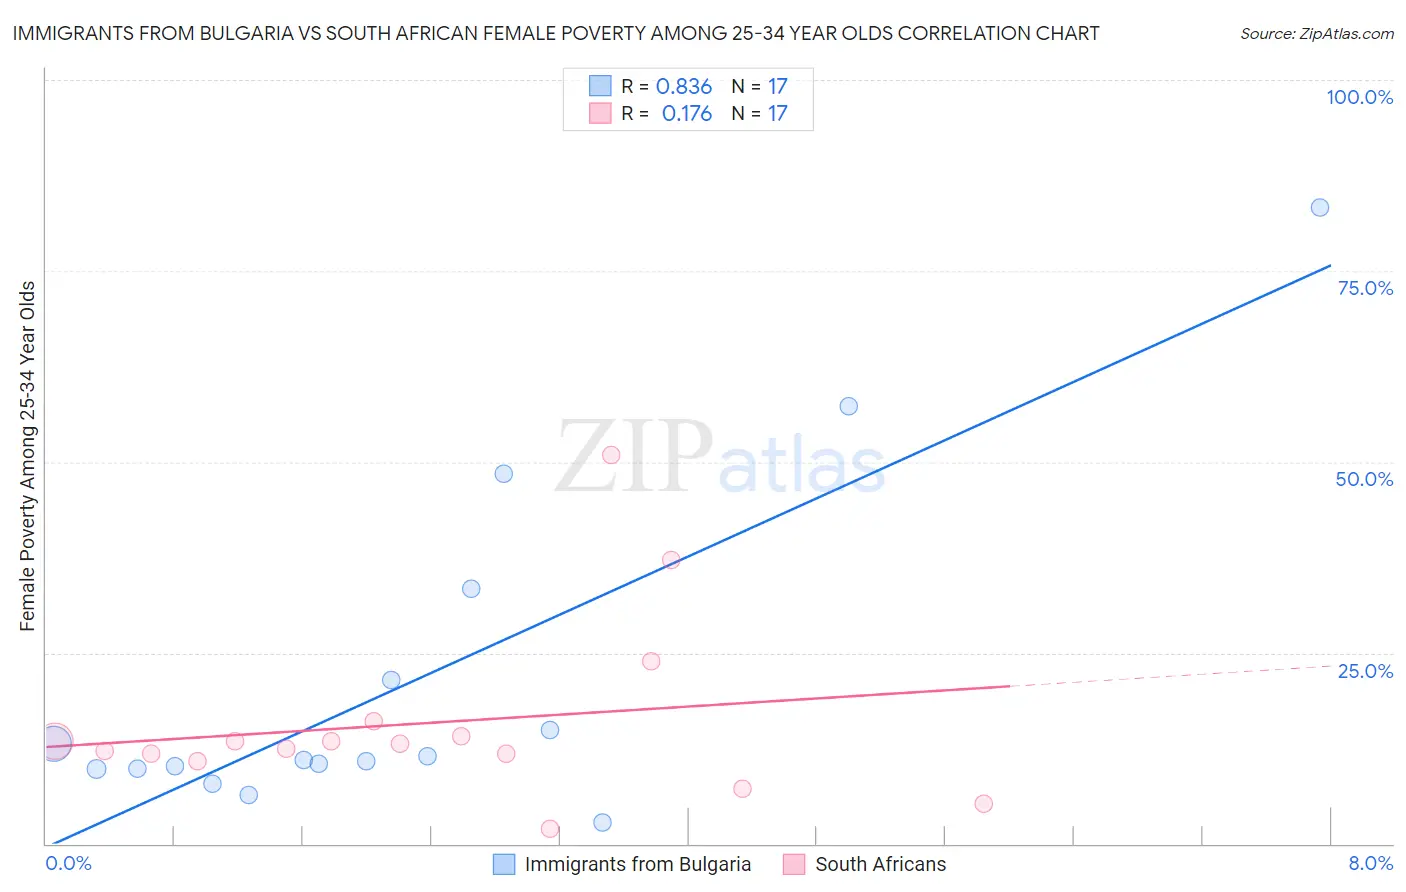 Immigrants from Bulgaria vs South African Female Poverty Among 25-34 Year Olds